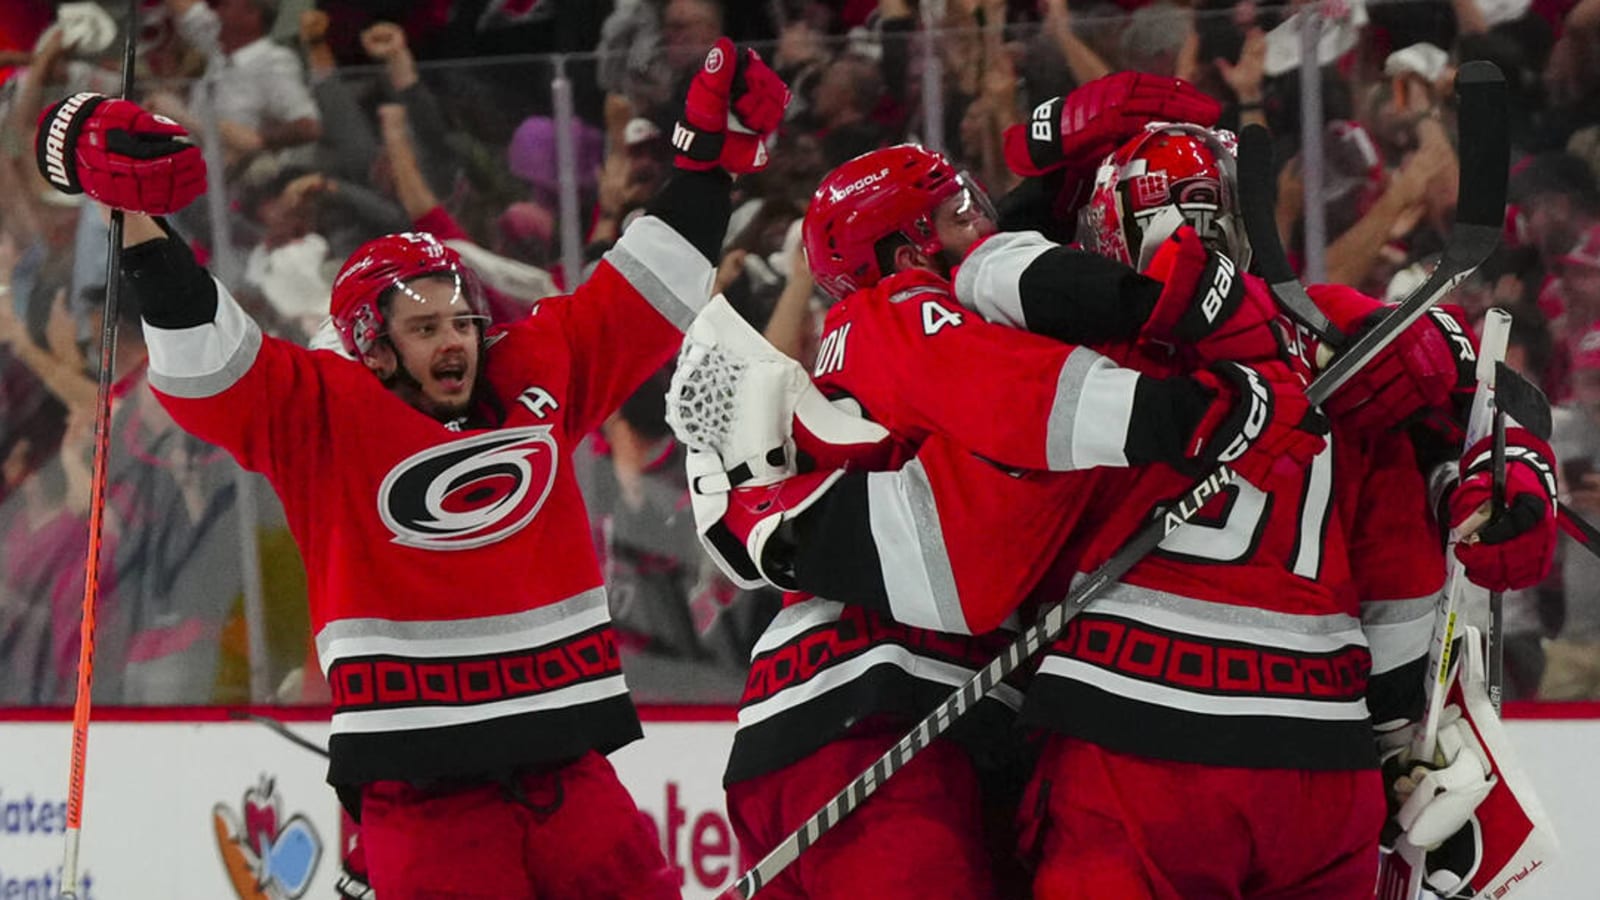 The Hurricanes have been doubted all the way to the Eastern Conference Final